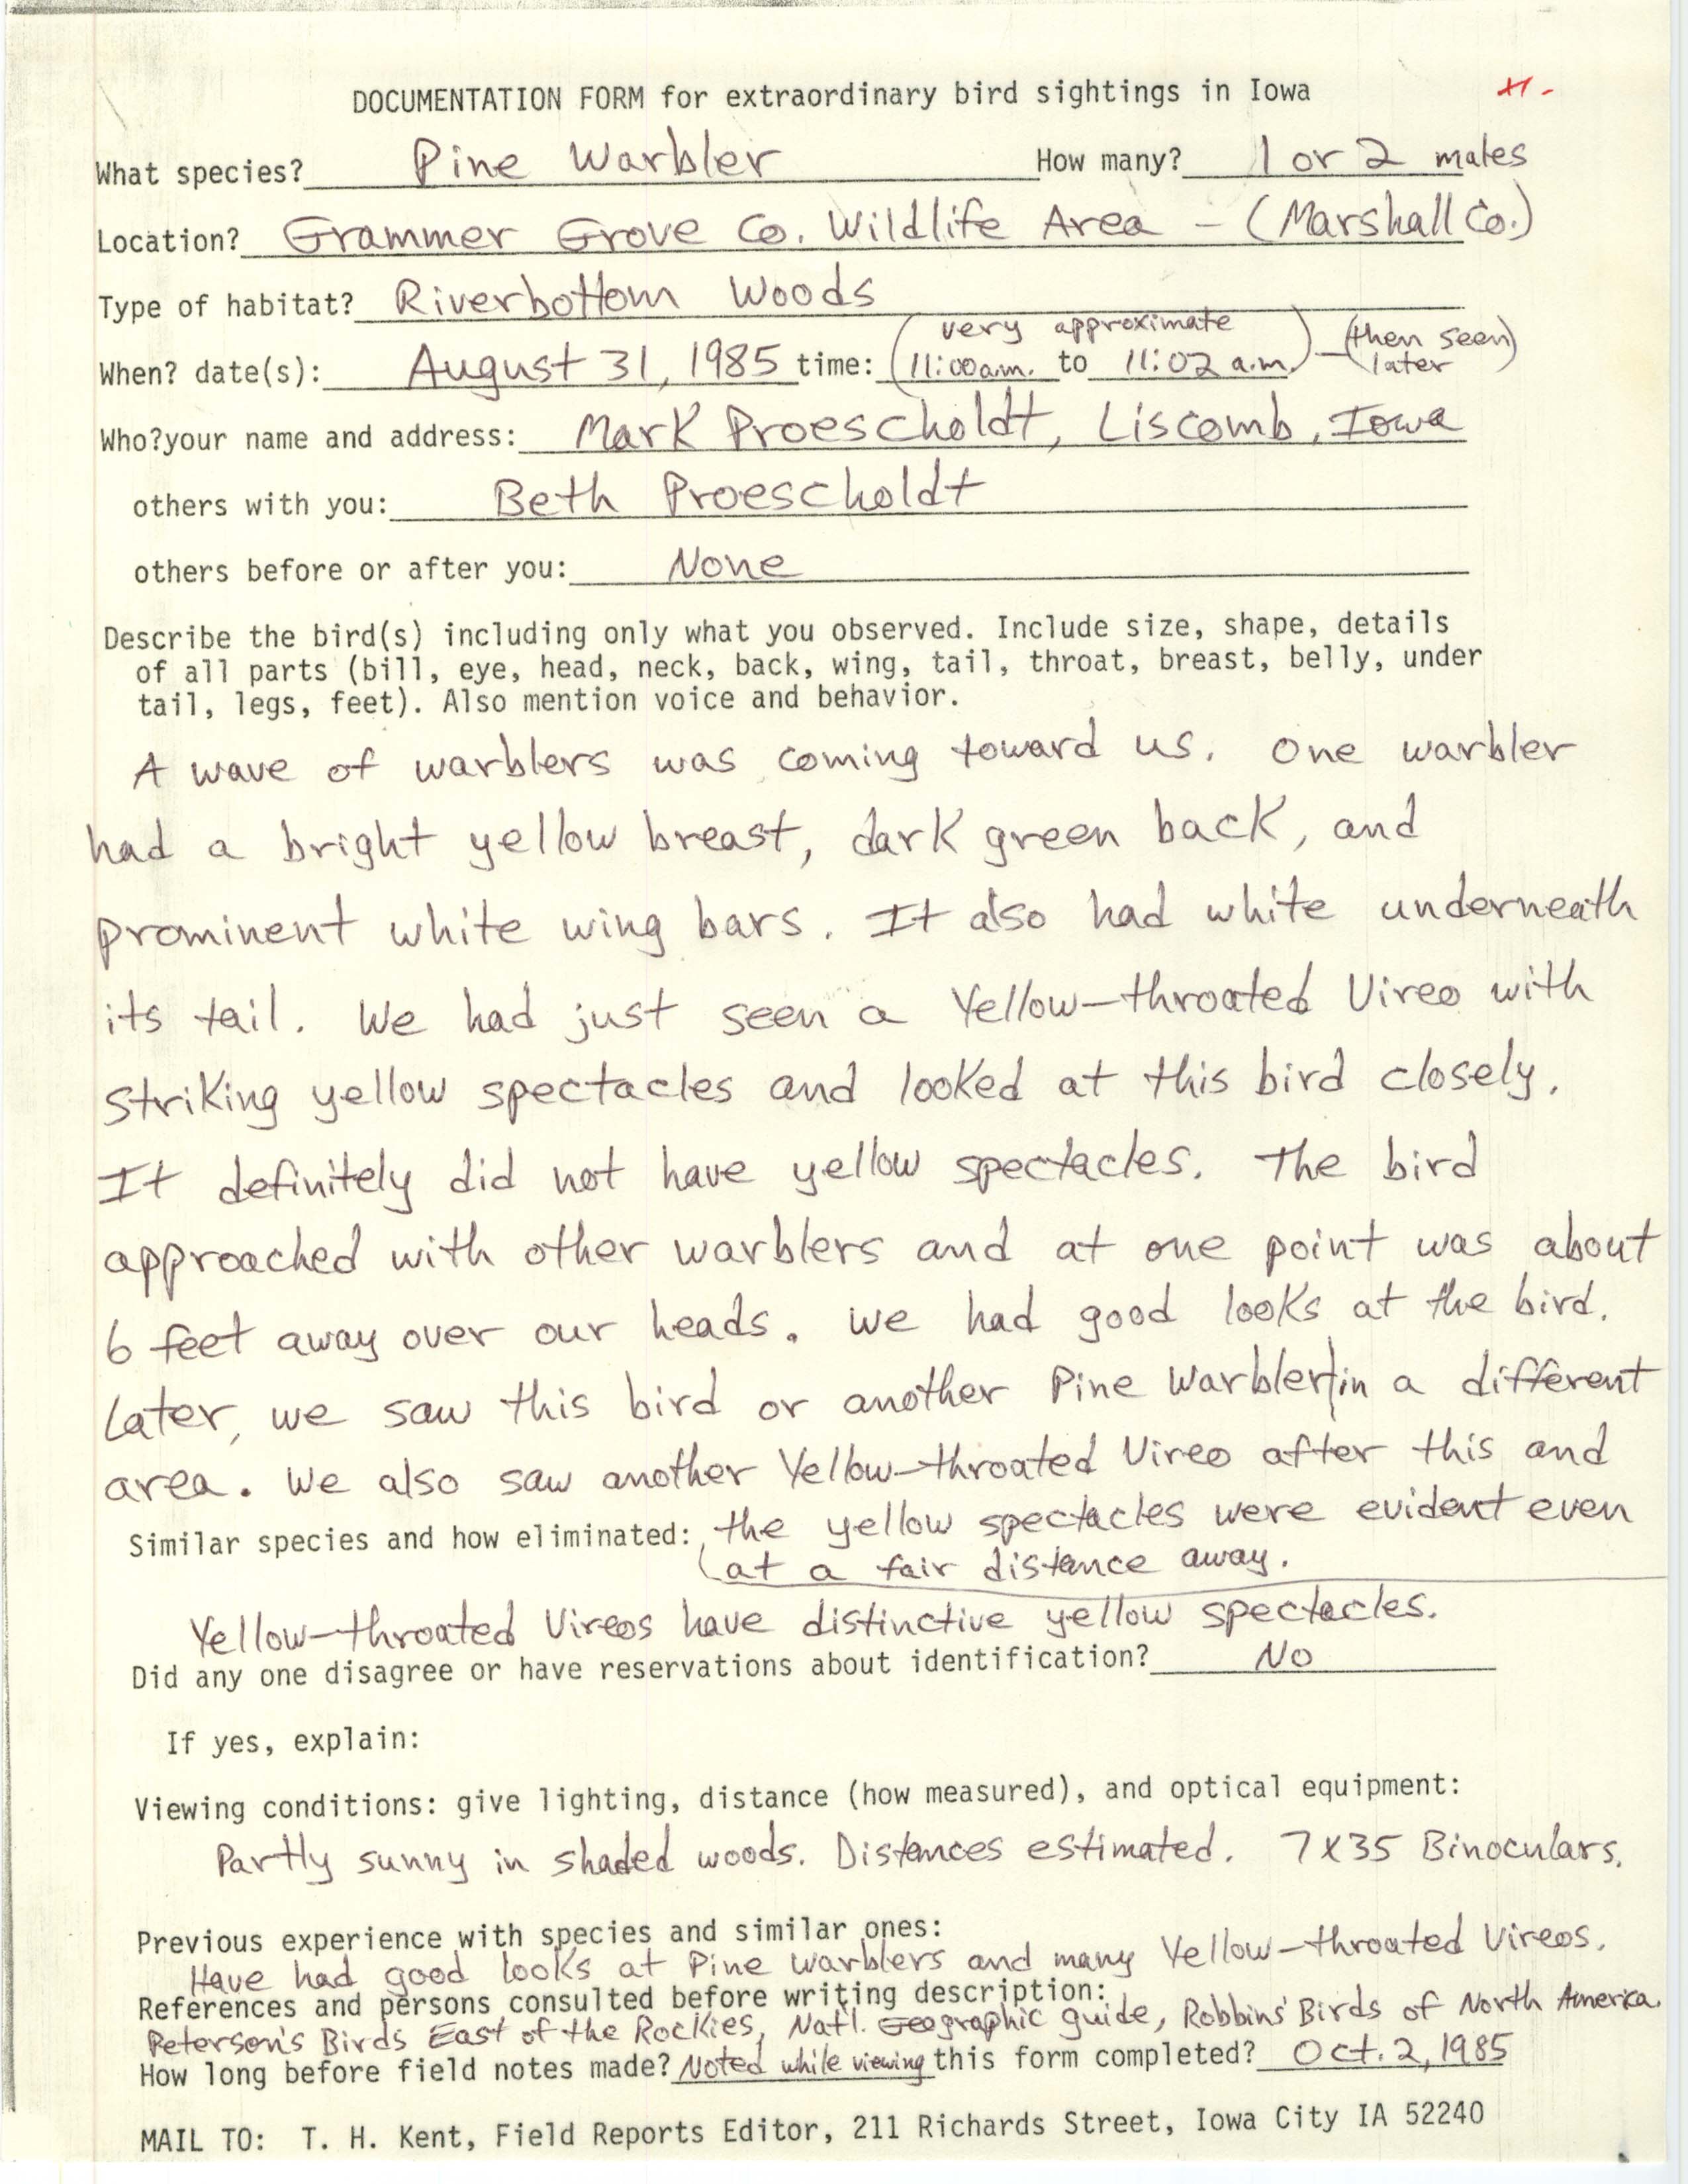 Rare bird documentation form for Pine Warbler at Grammer Grove County Wildlife Area, 1985